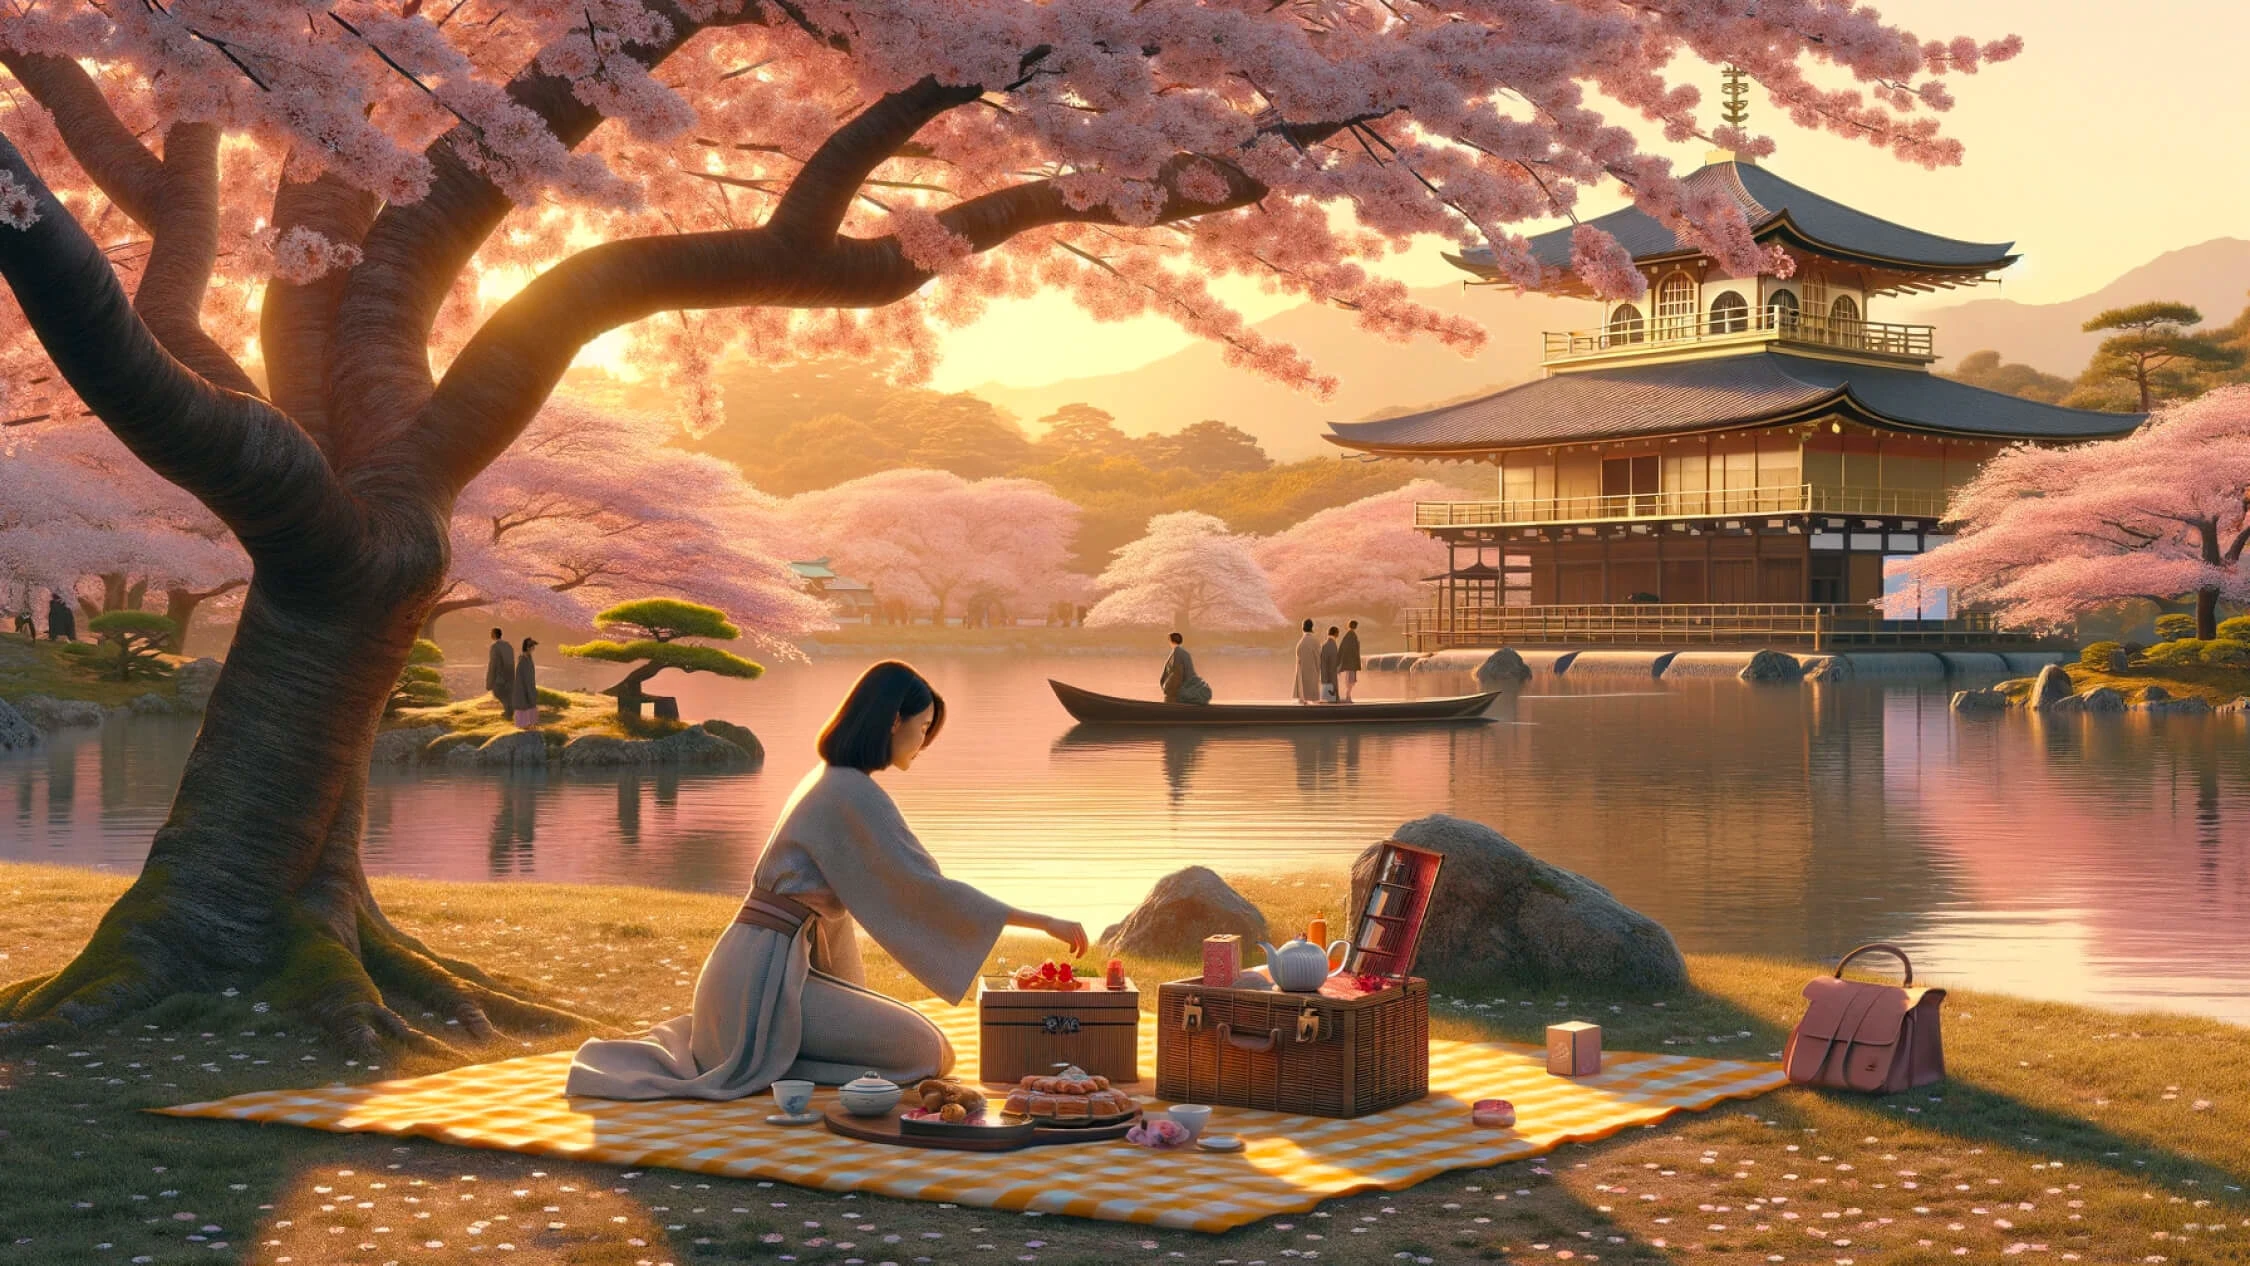 A woman underneath a cherry blossom tree is setting up a picnic on a yellow checkered blanket around sunset. Behind her, a small, calm body of water containing a boat with 4 figures on their way to a Pagoda in the middle of the water. 